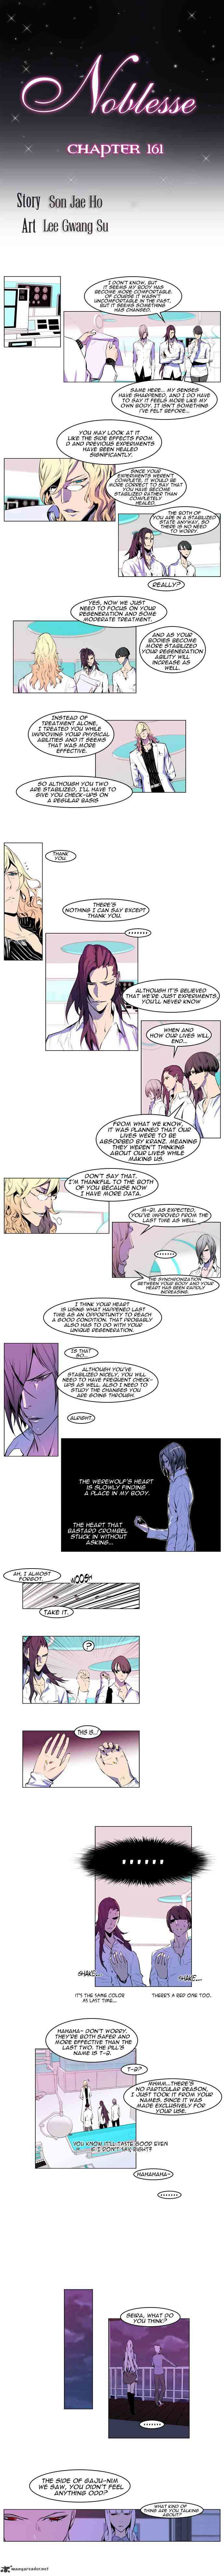 Noblesse Chapter 161 page 2